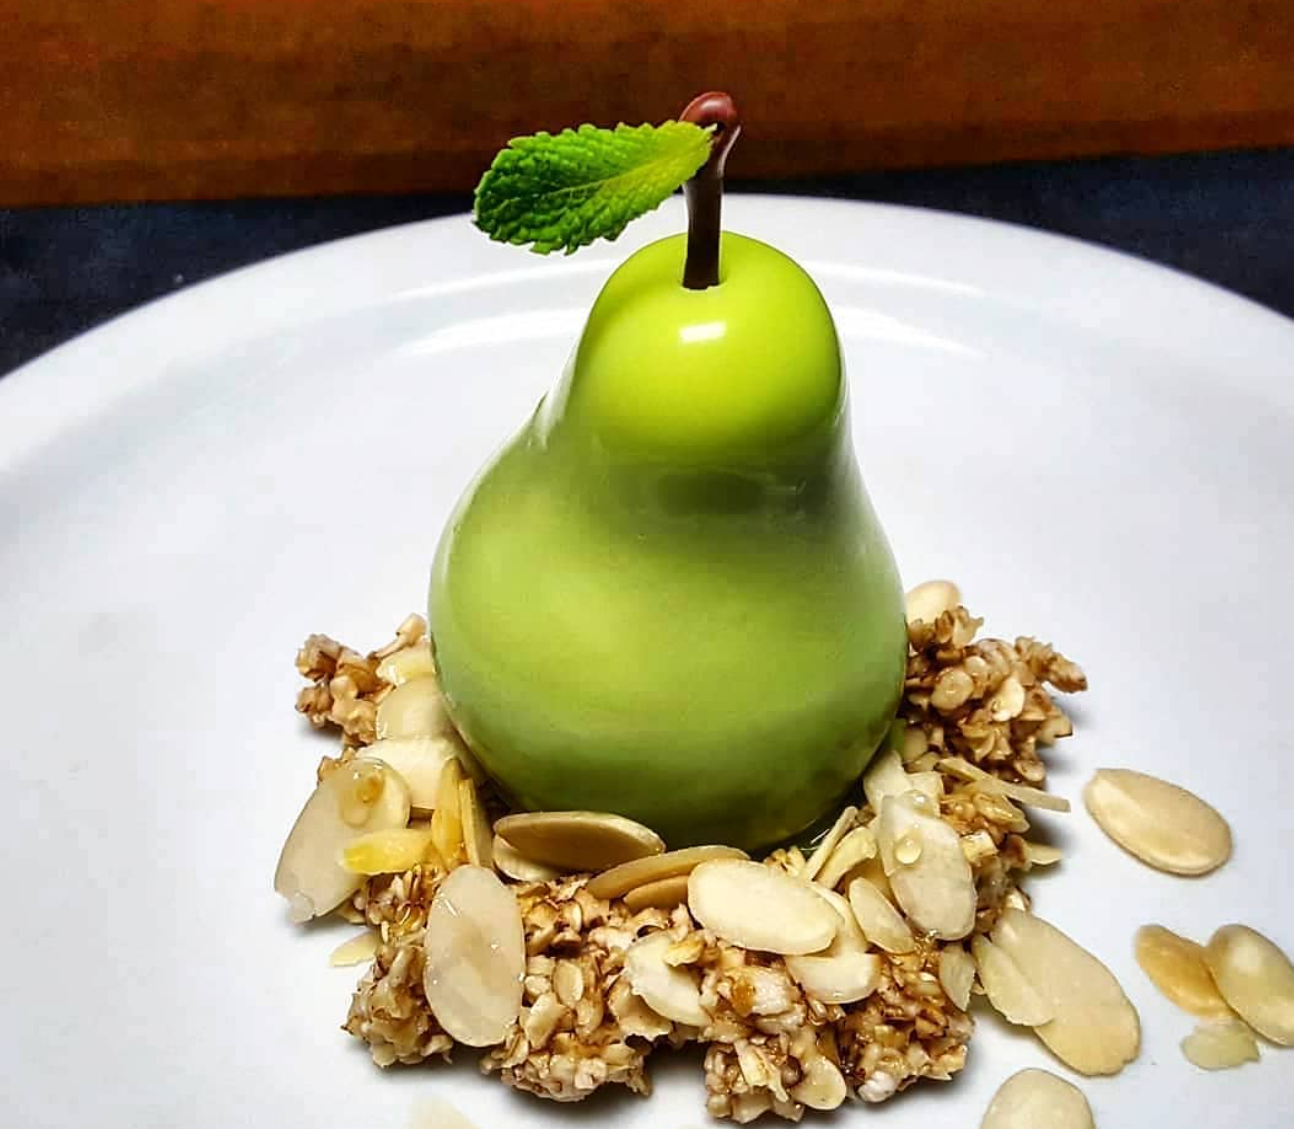 A pear sitting on a bed of almonds, food optical illusion by chefbenchurchill instagram